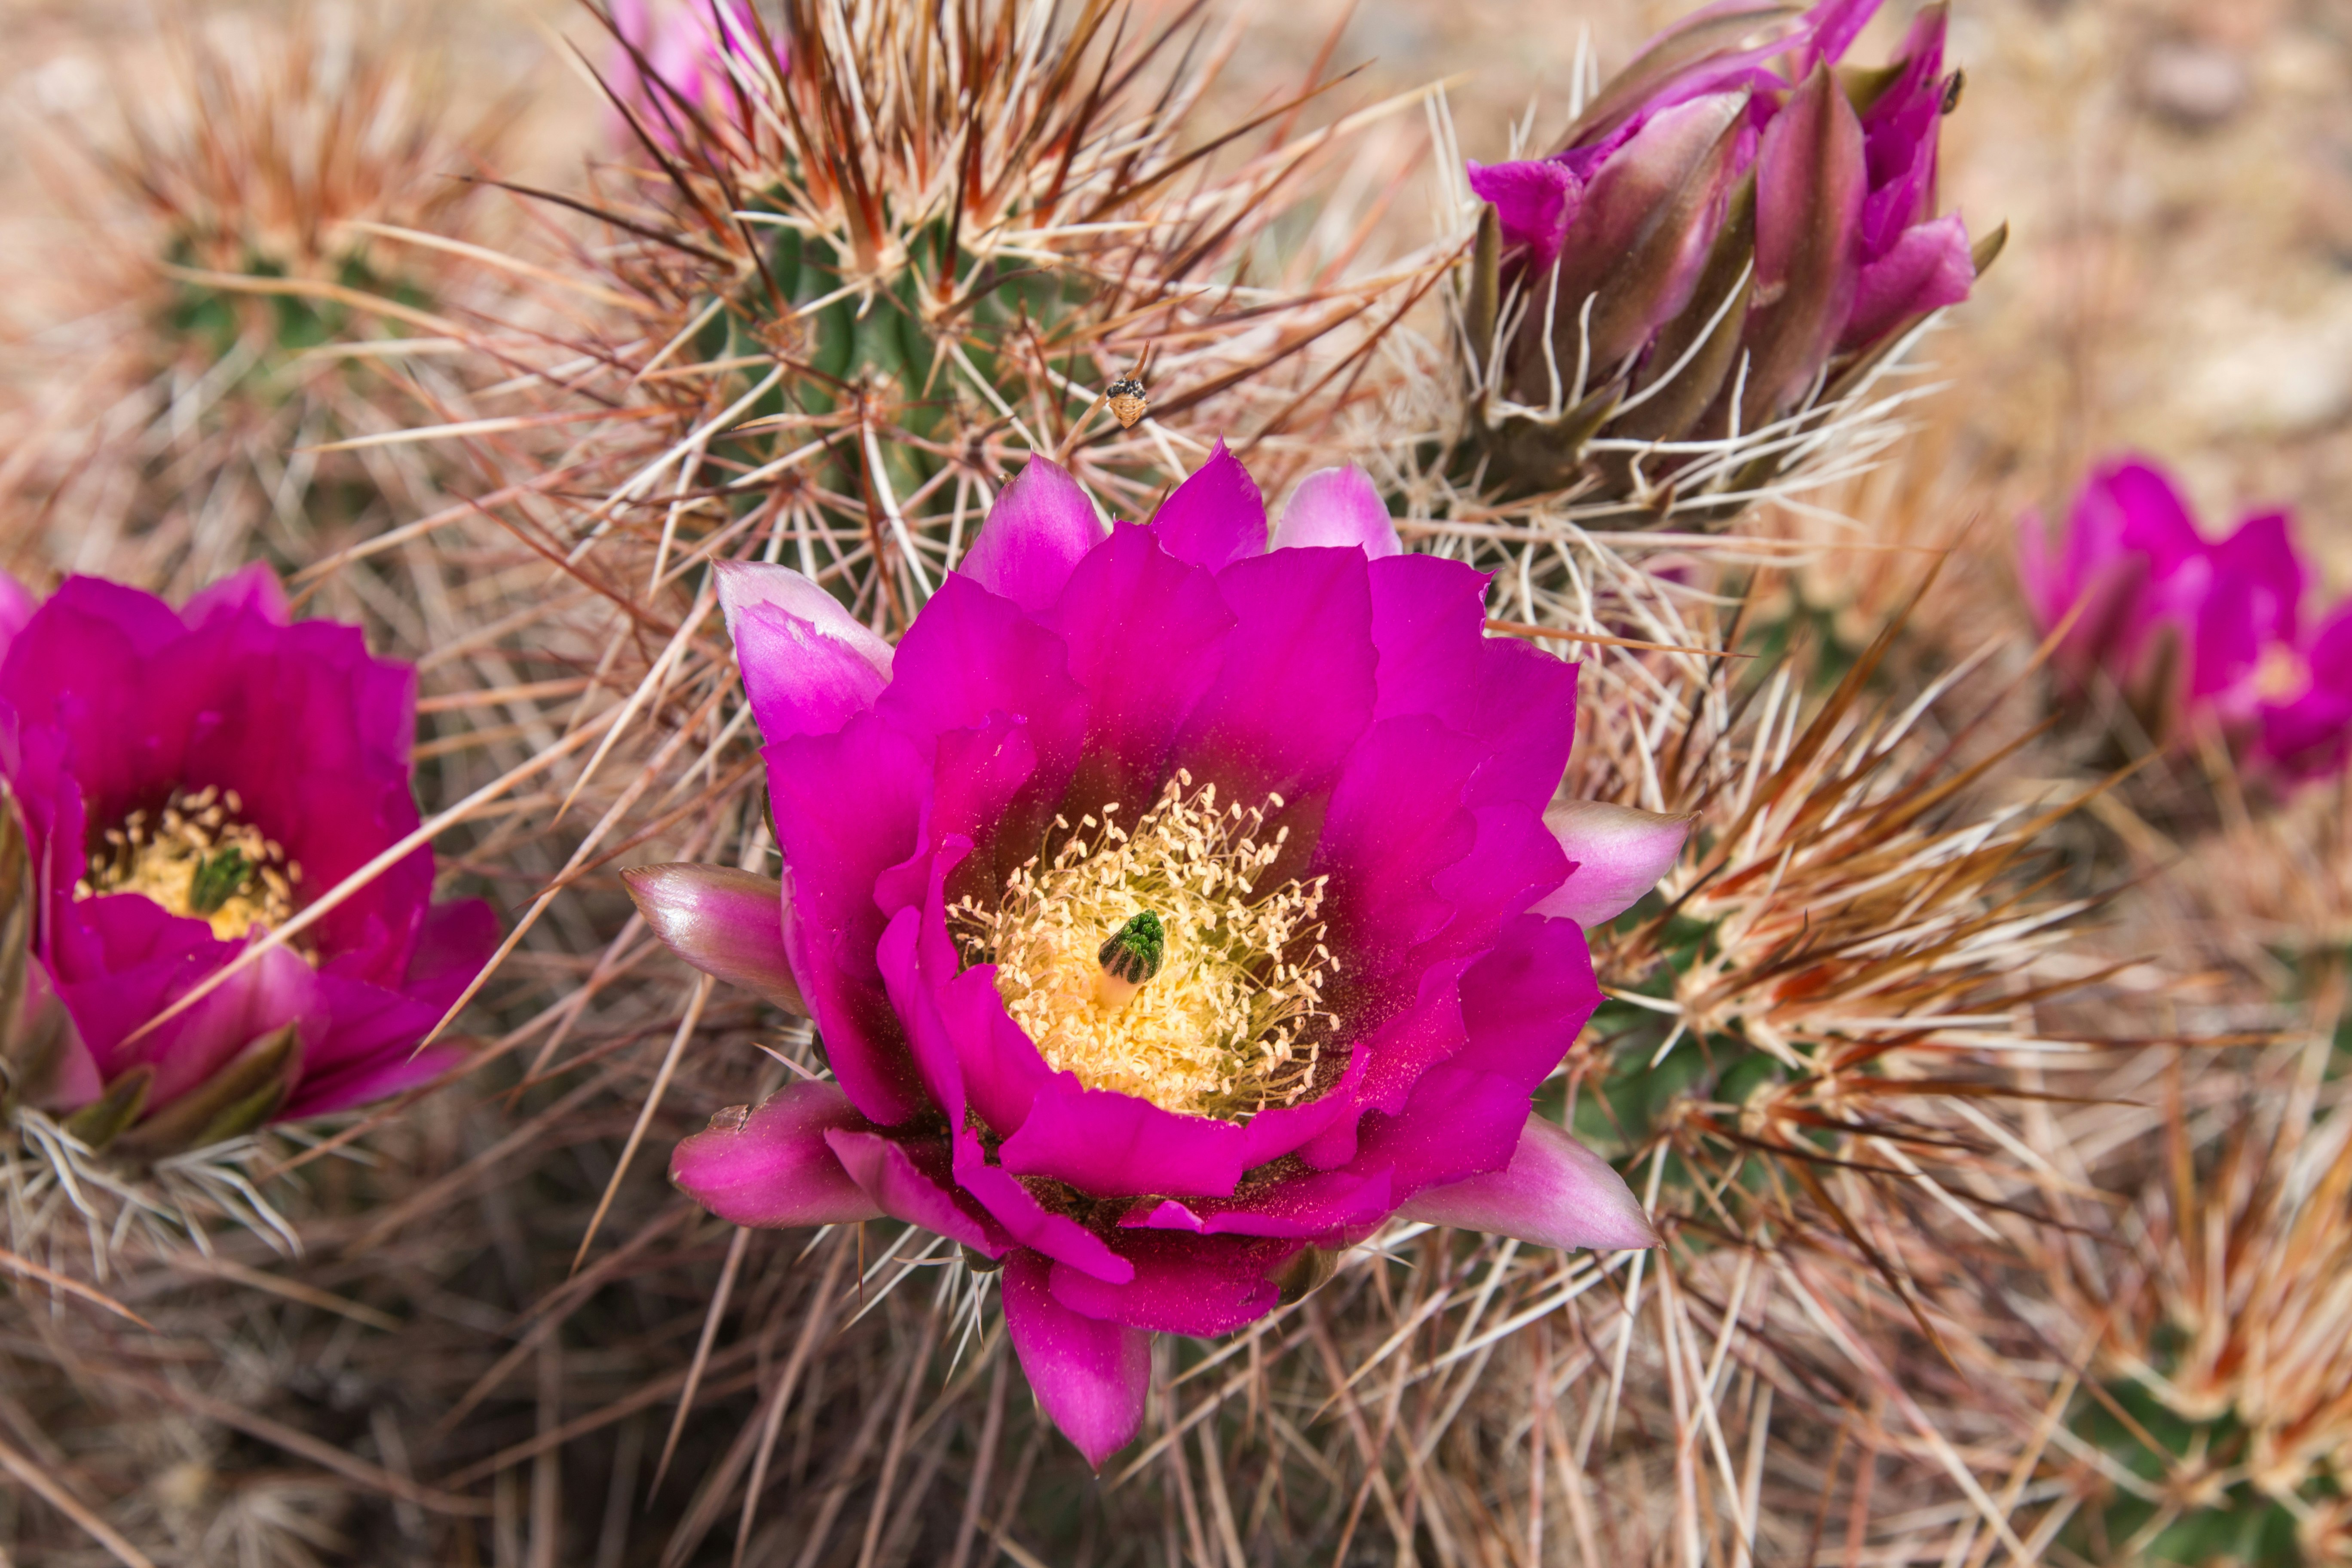 A flower bloom on a cactus plant